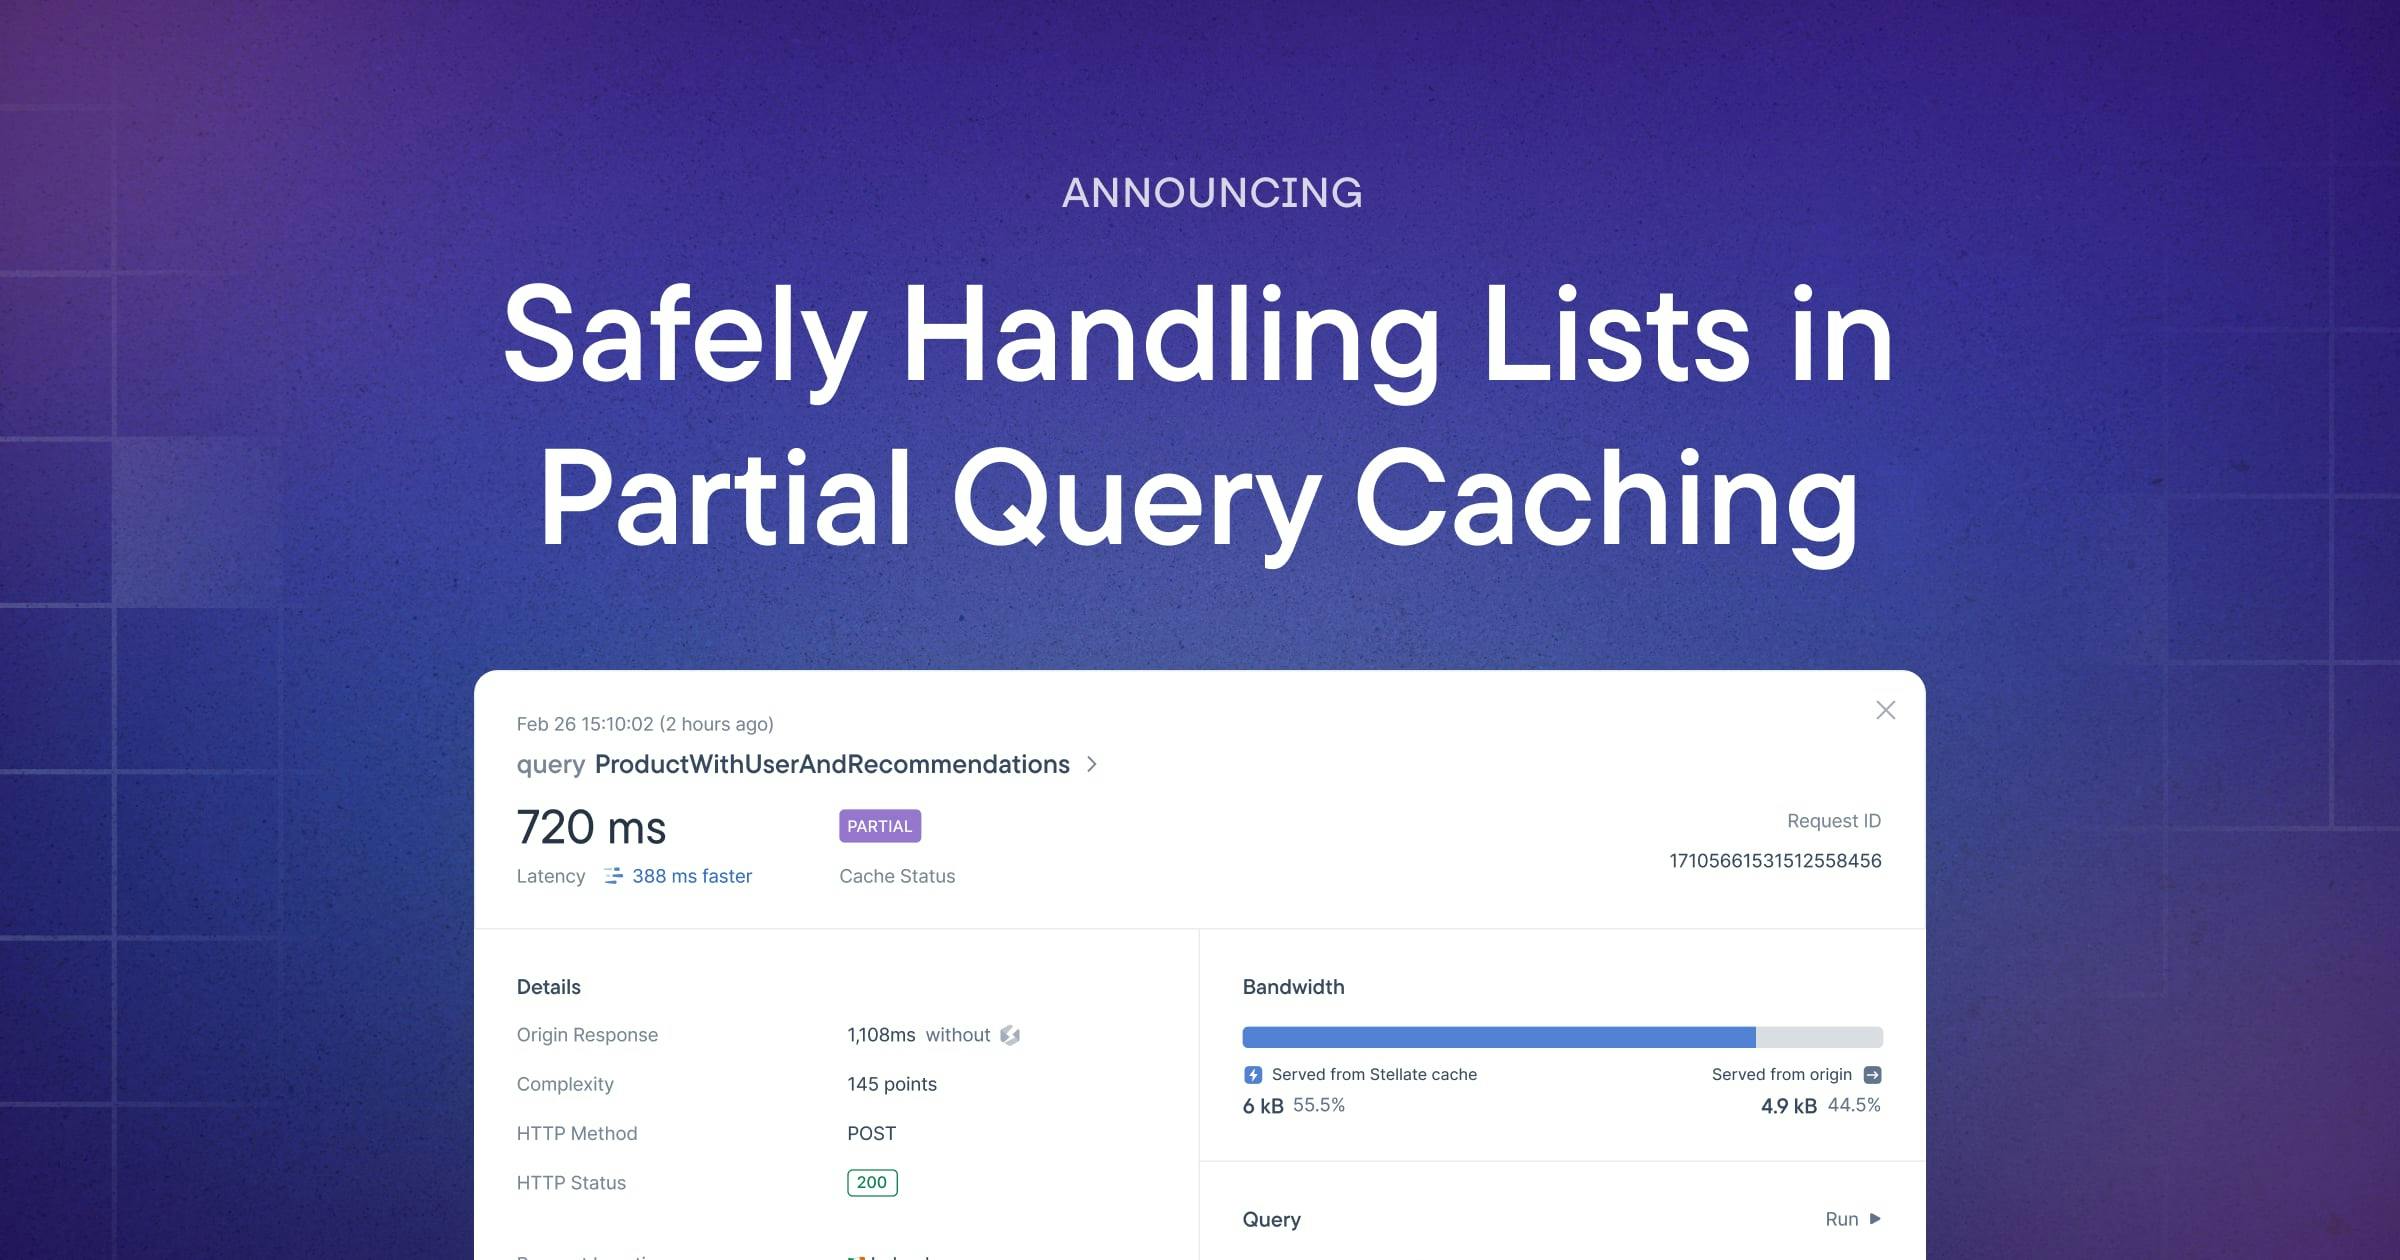 Safely Handling Lists in Partial Query Caching